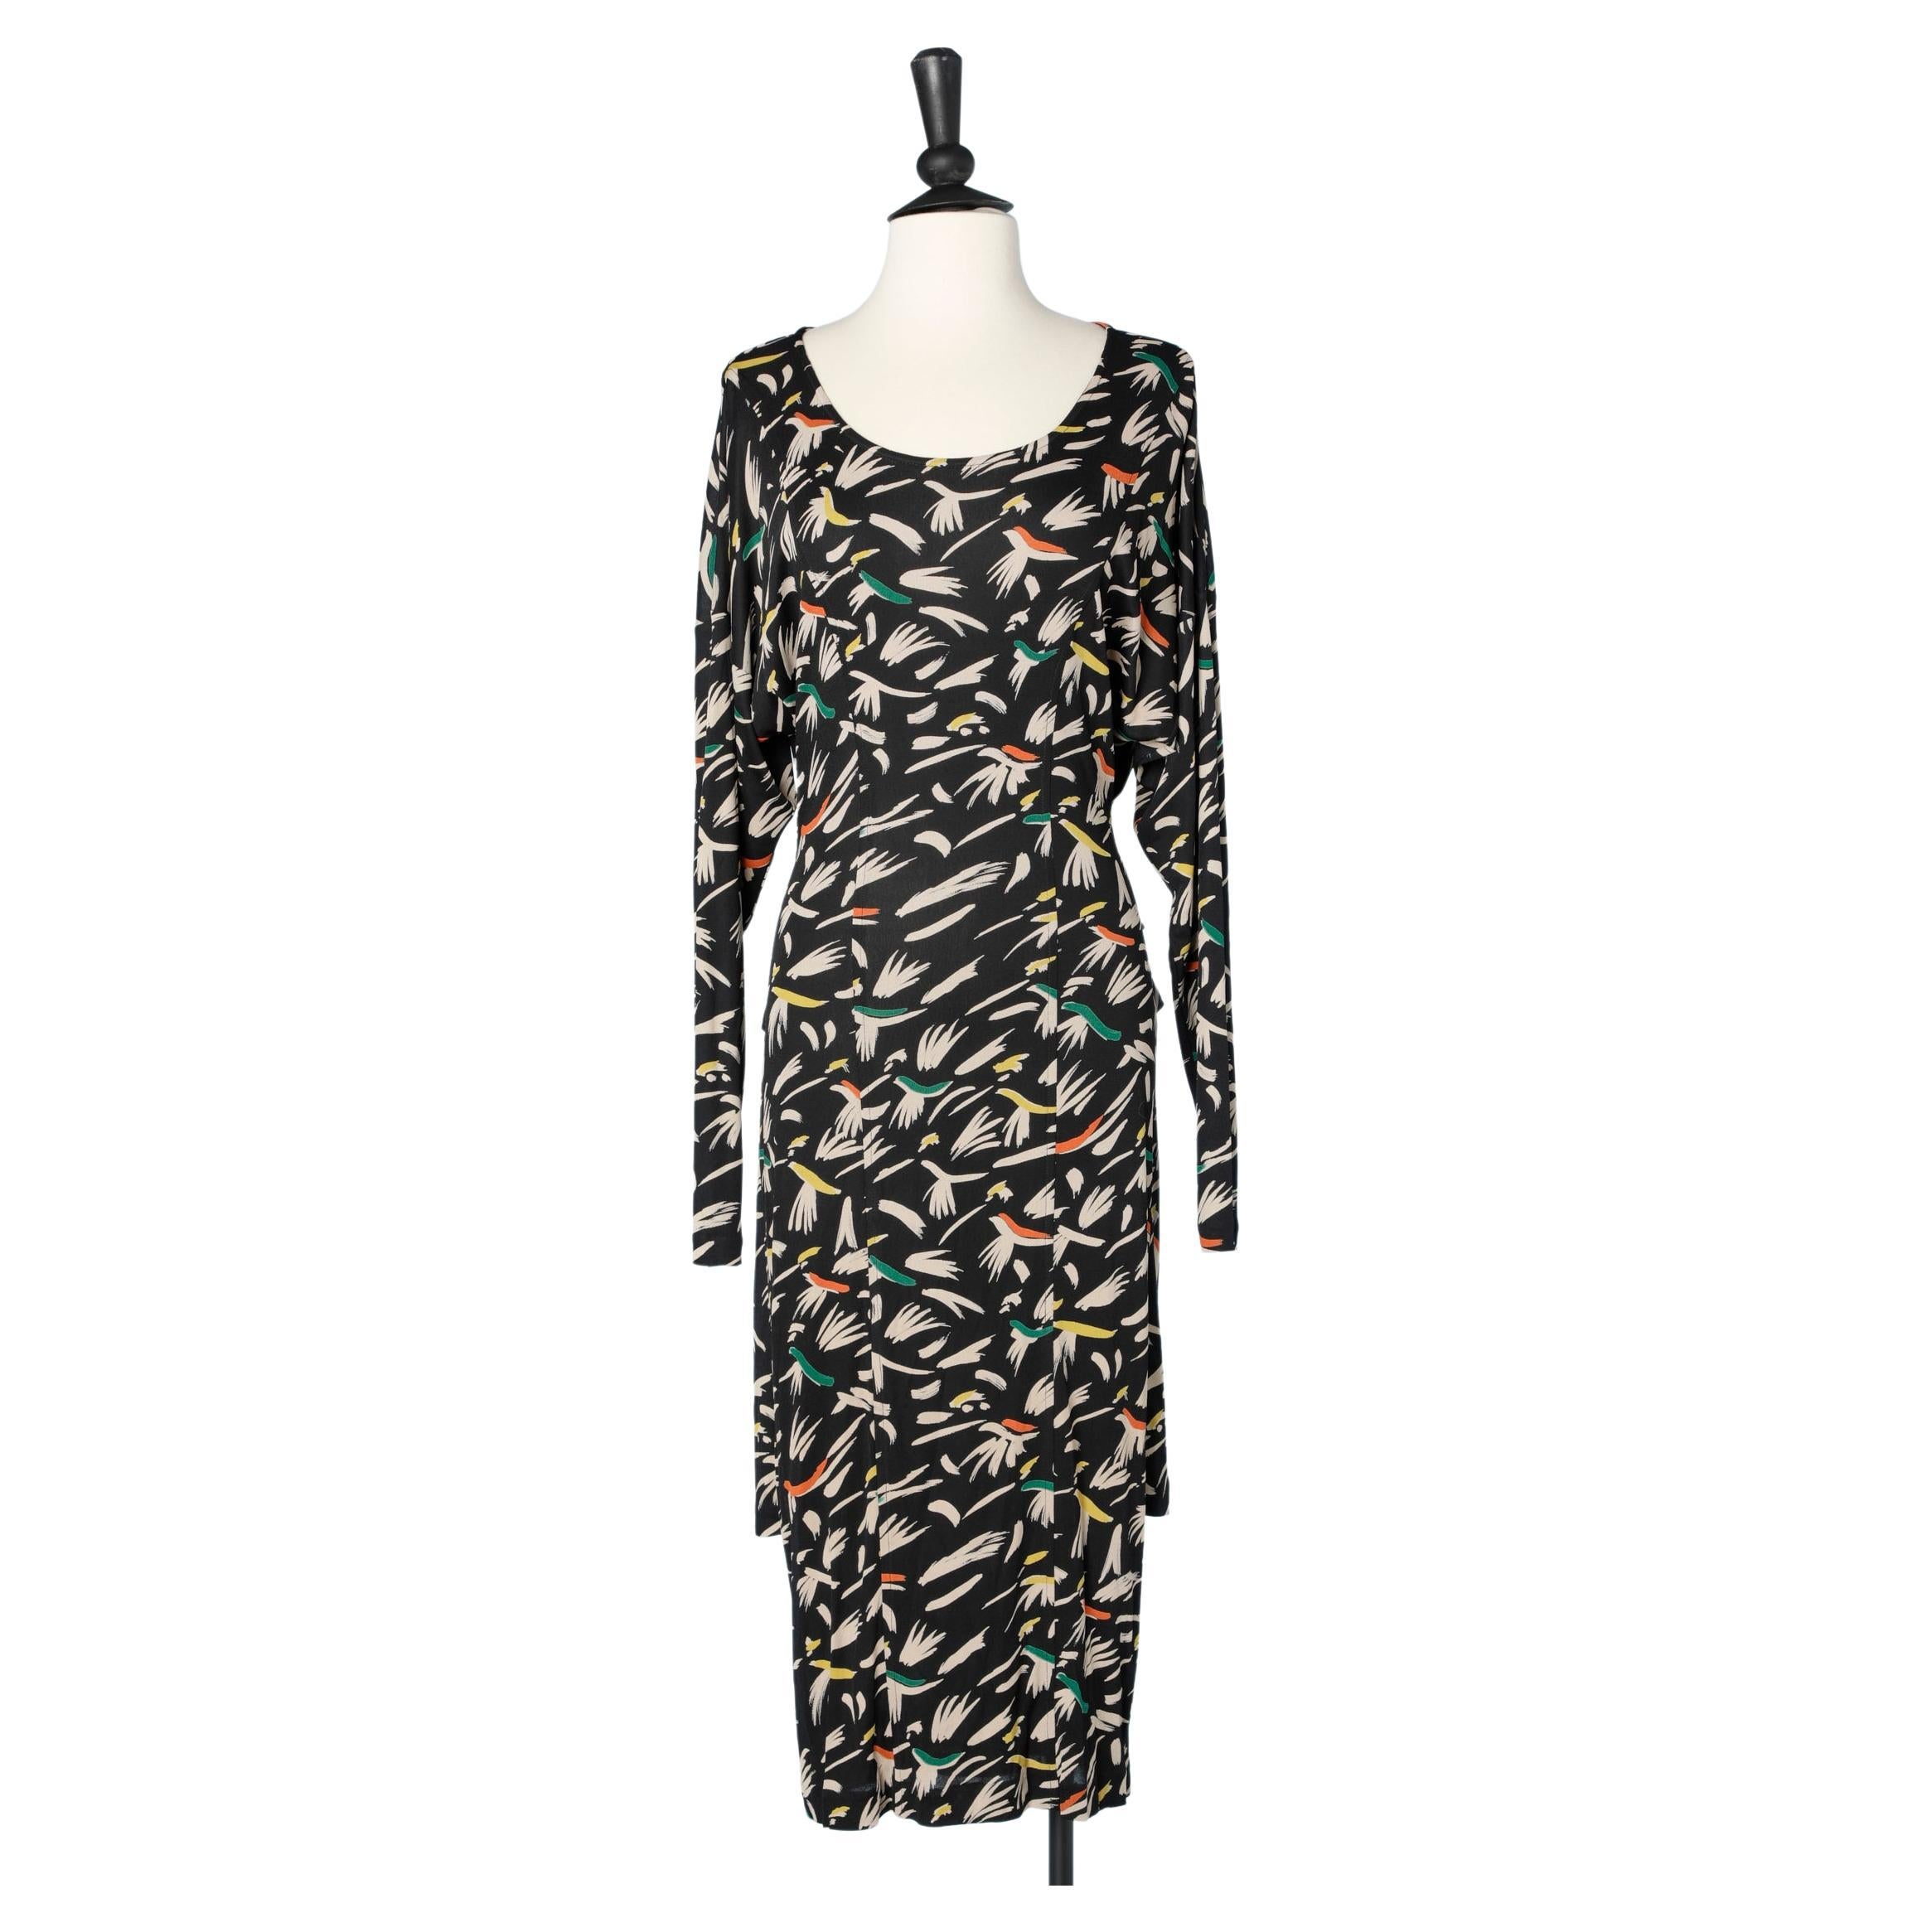 Printed jersey dress with crossed belt in the back waist Missoni  For Sale